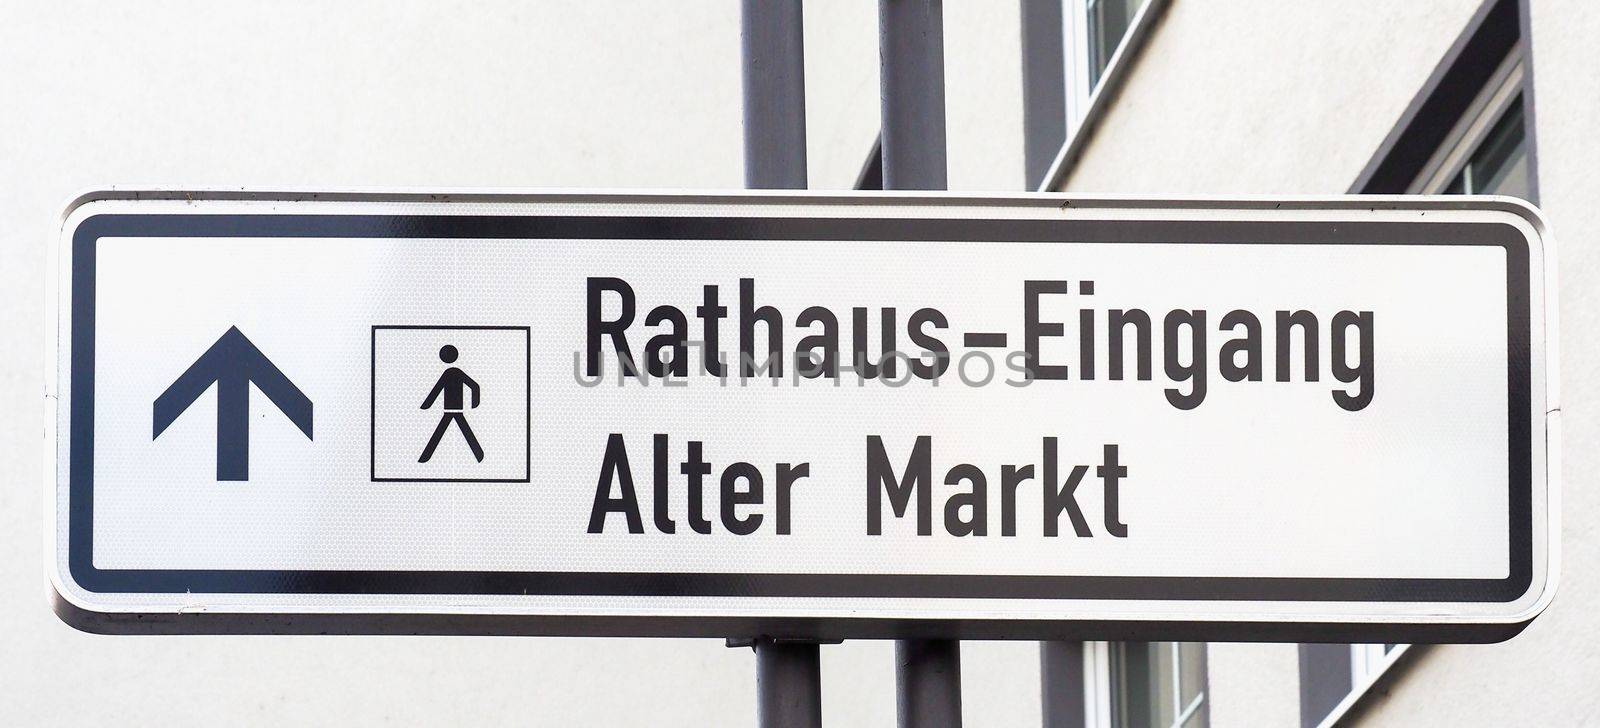 Rathaus Eingang (meaning Town Hall Entrance), Alter Markt (meaning Old Market) sign in Koeln, Germany